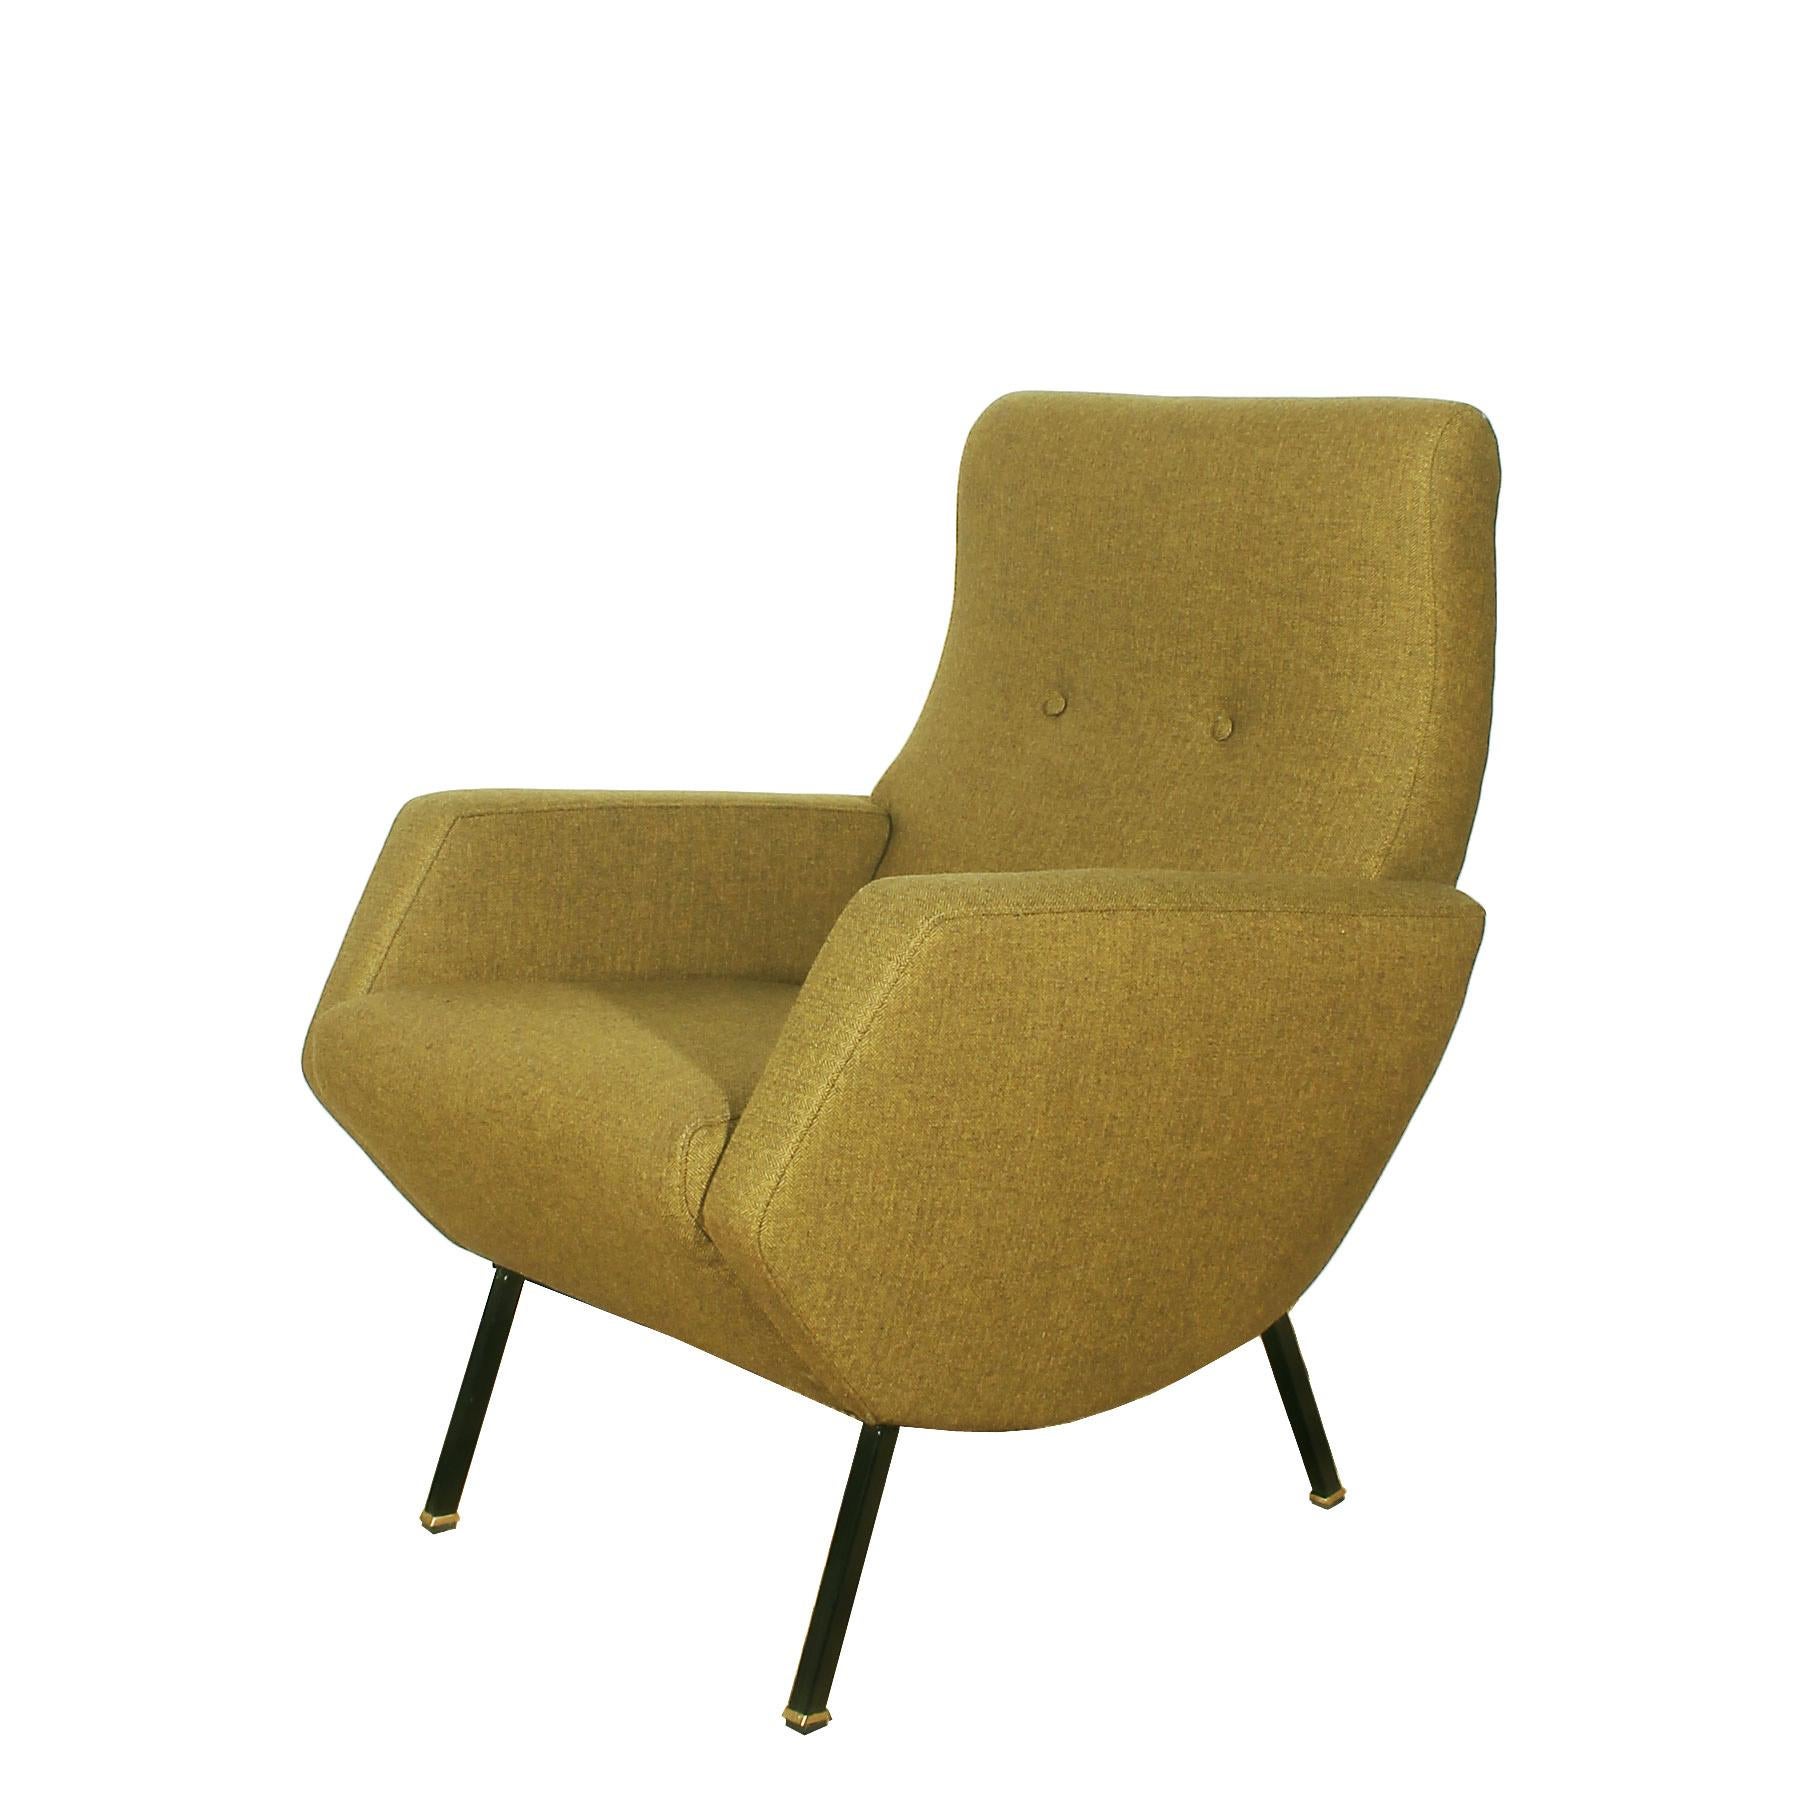 Pair of Mid-Century Modern Armchairs in New Mottled Yellow Fabric - Italy, 1960s In Good Condition For Sale In Girona, ES